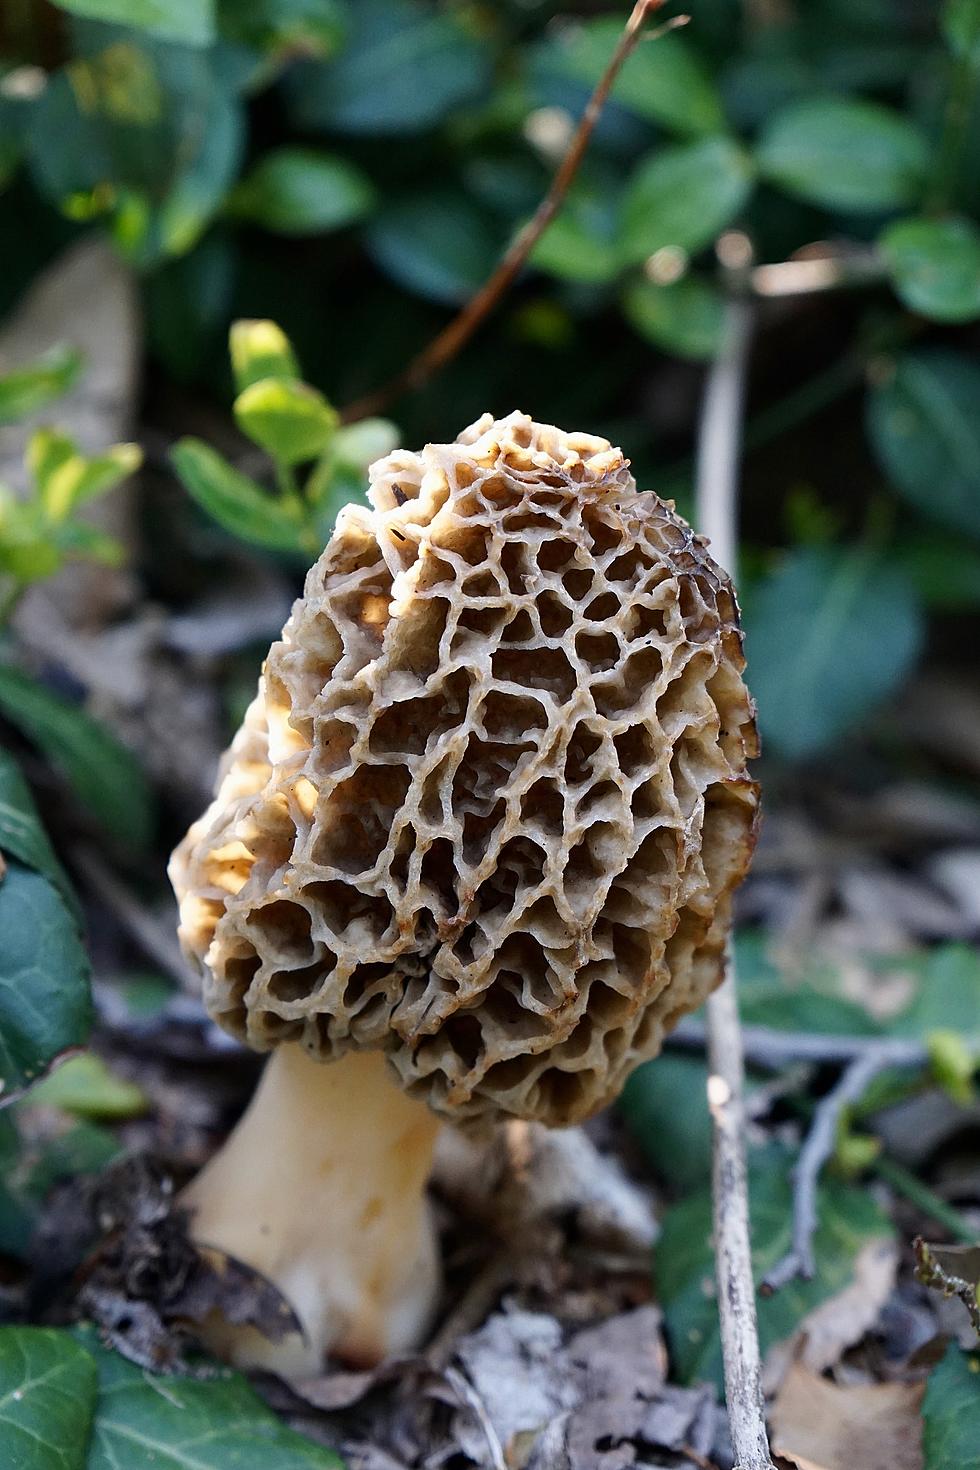 Morel Mushrooms Spotted in Southern Indiana – Here’s What You Need to Know About Mushroom Hunting in 2022